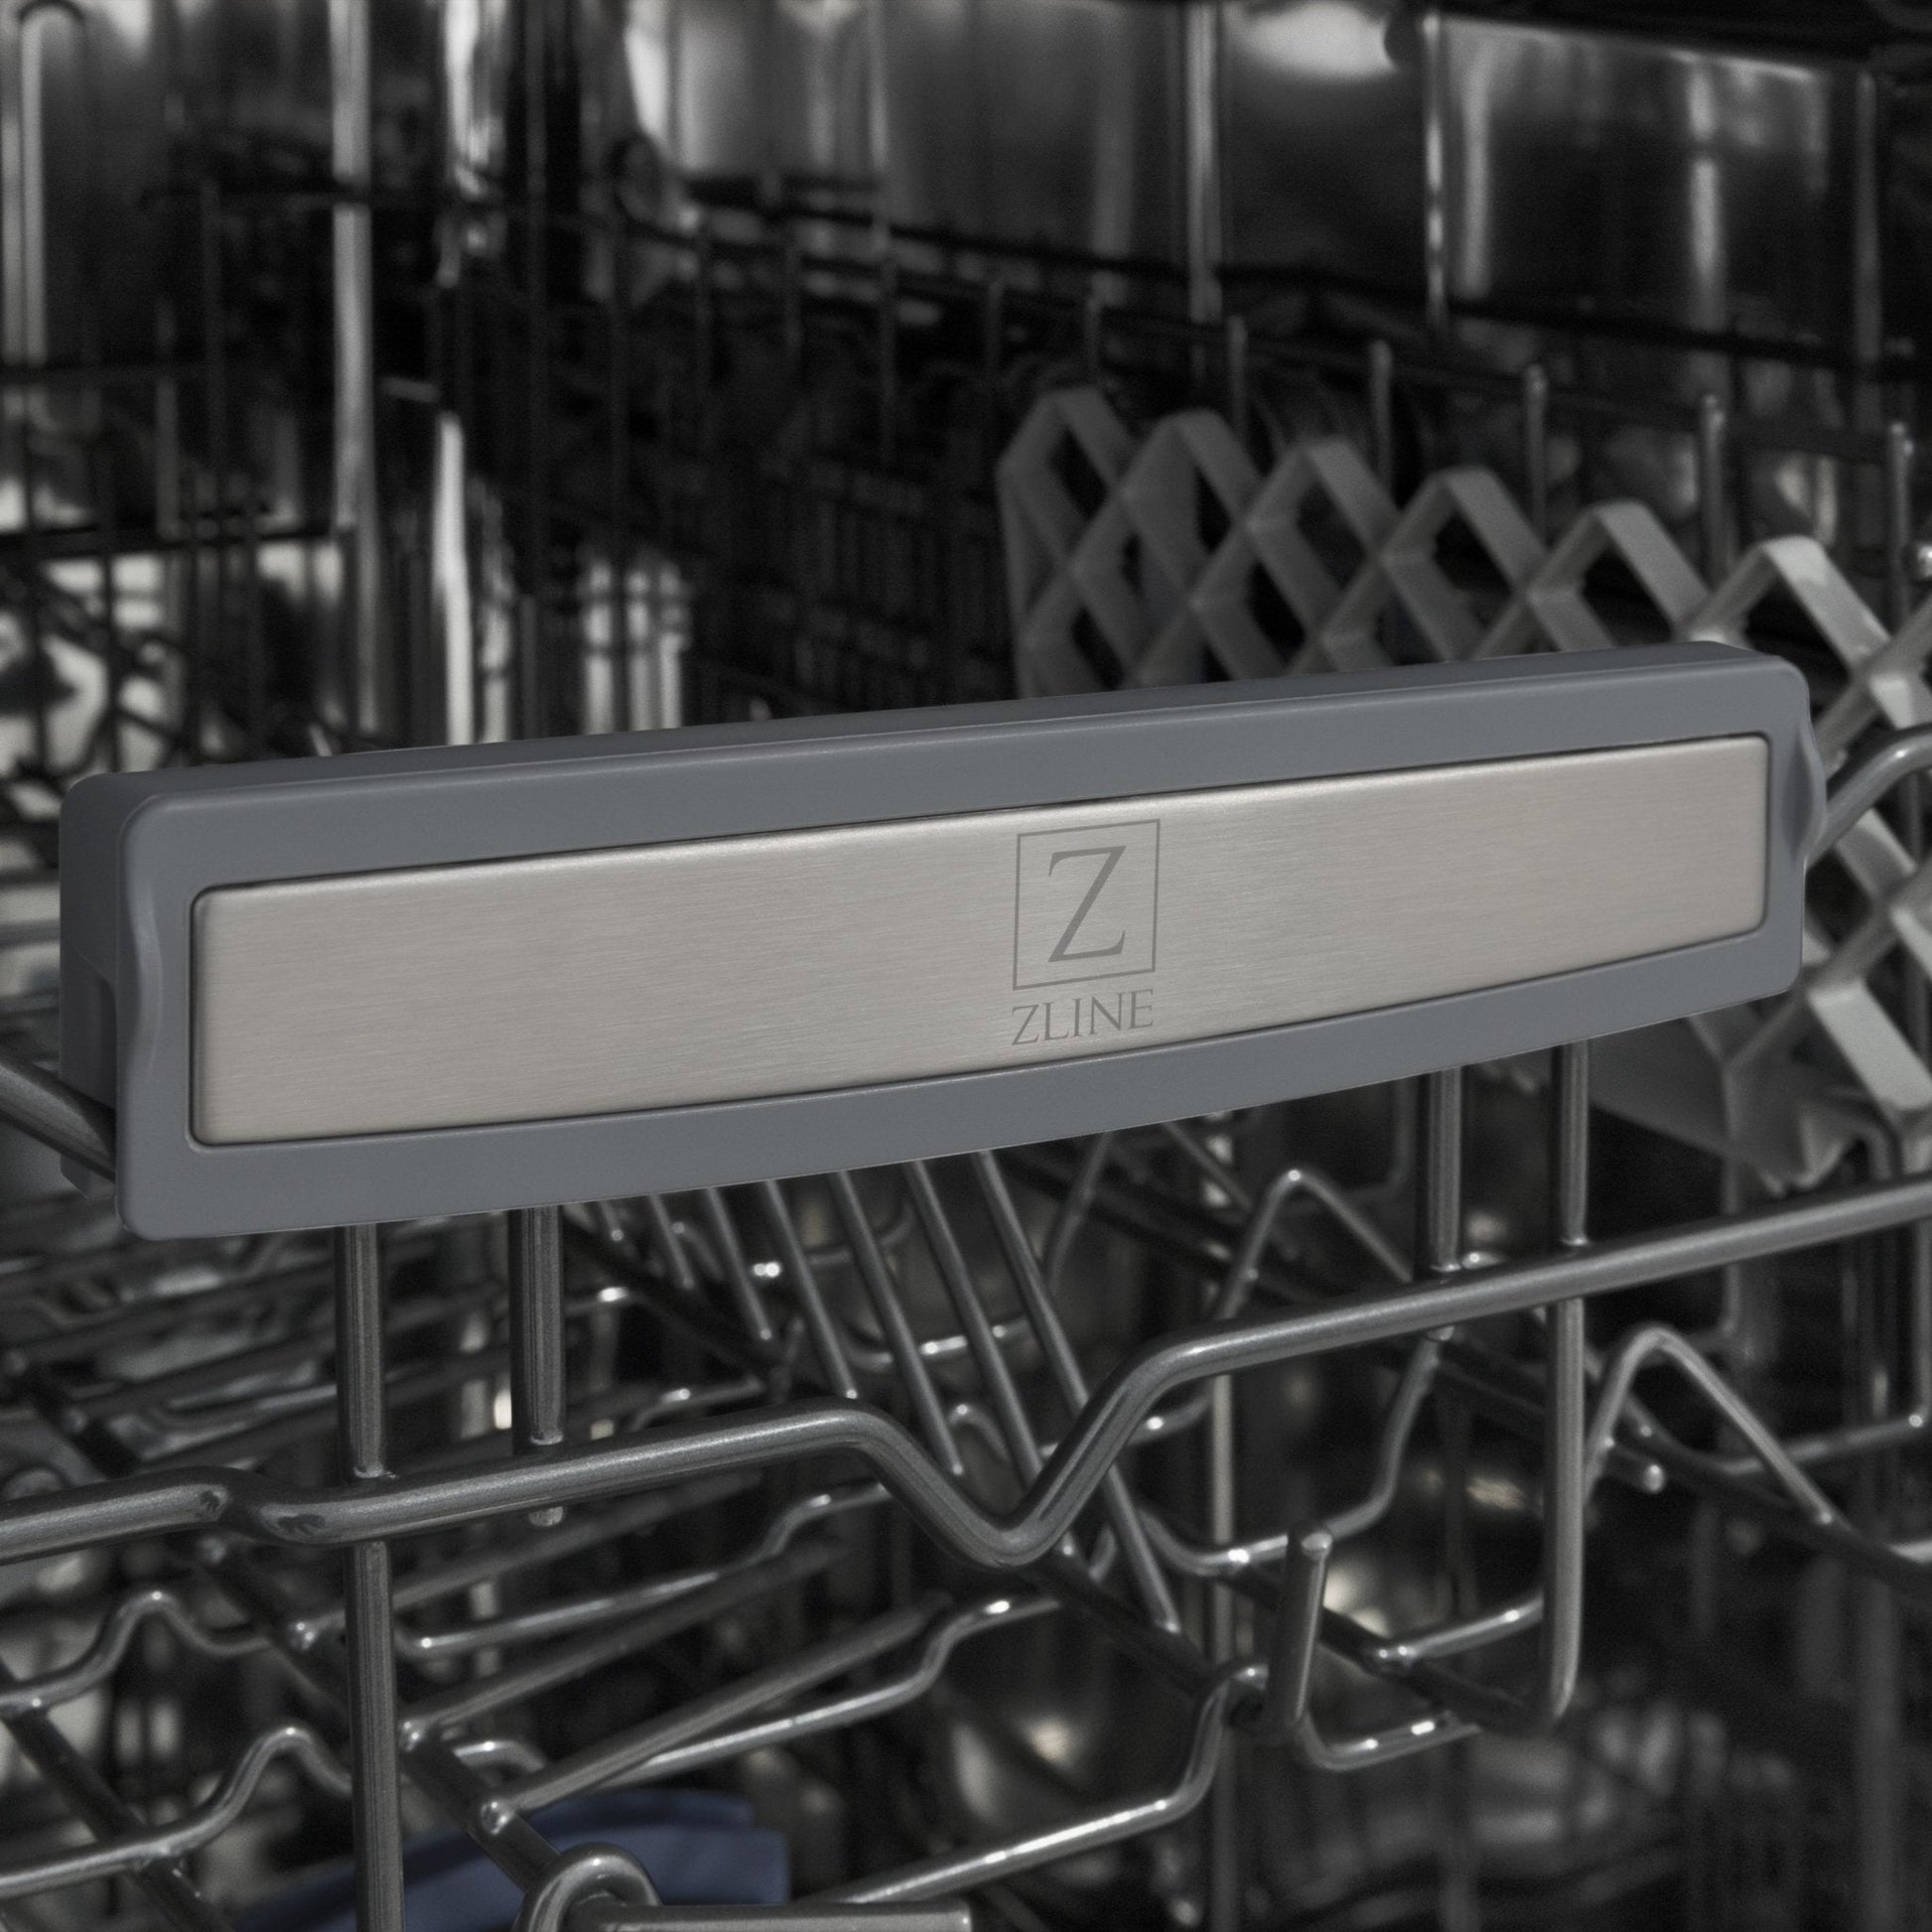 ZLINE 18" Tallac Series 3rd Rack Top Control Dishwasher - Stainless Steel Tub with Color Options